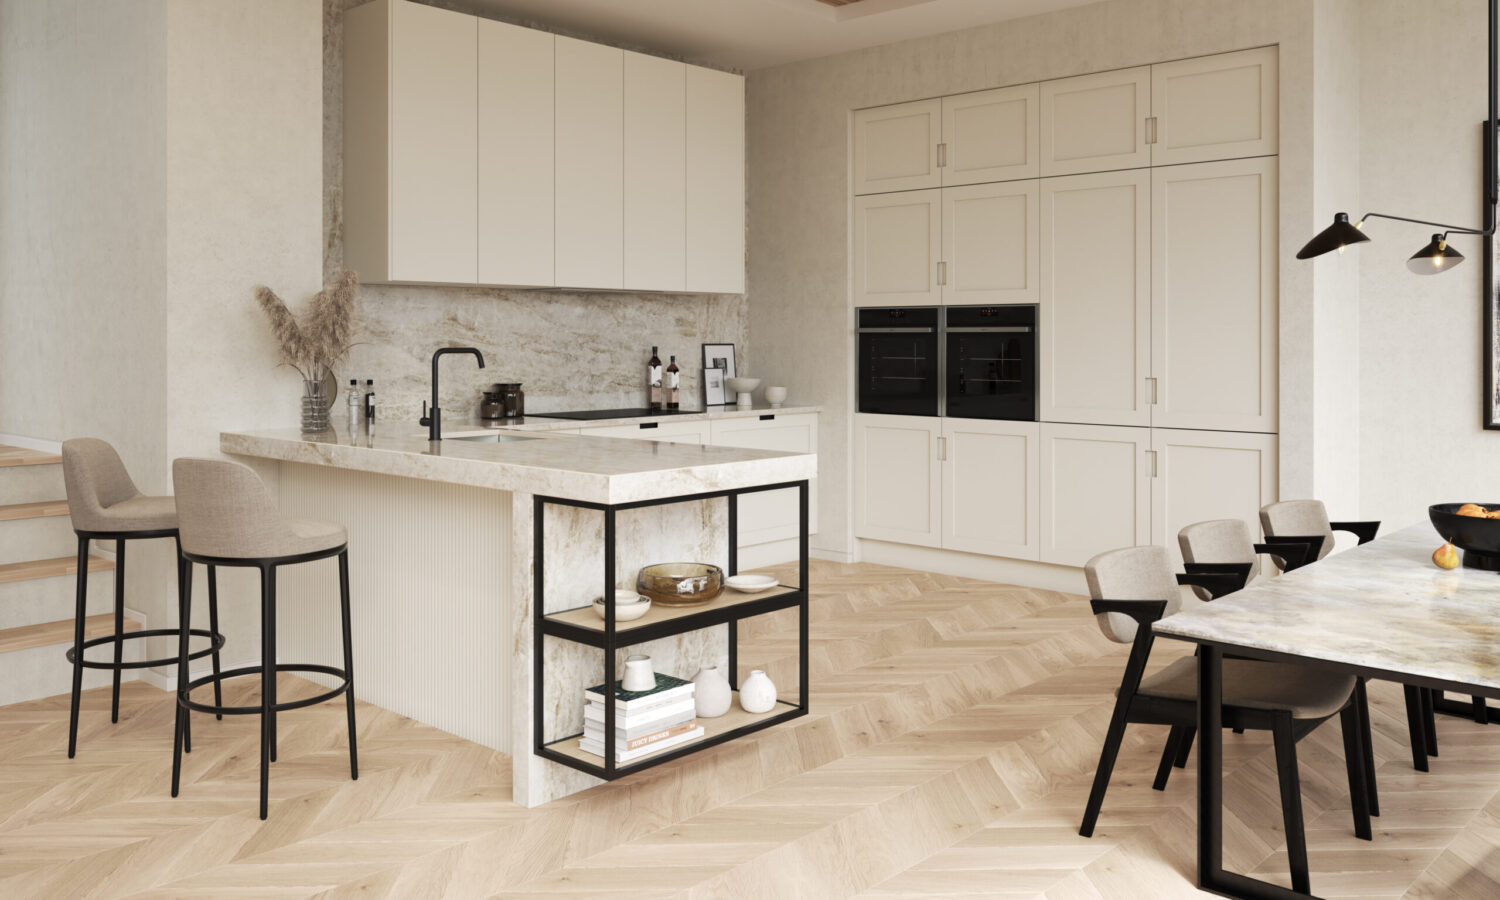 5 Factors to Consider When Choosing a Design for your Kitchen